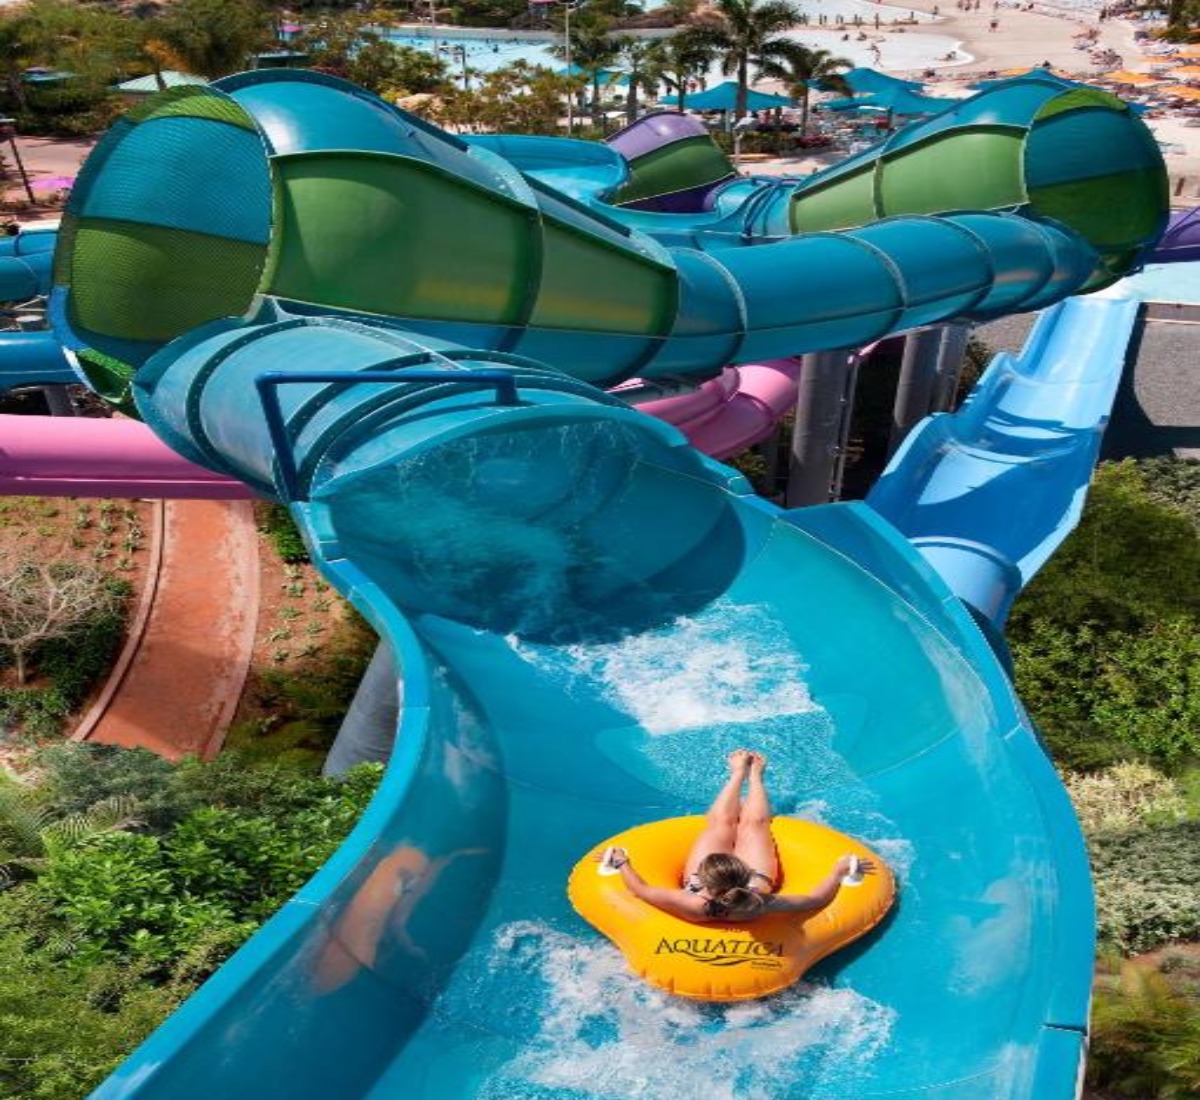 SpringHill Suites by Marriott Orlando at SeaWorld Orlando hotels with waterpark